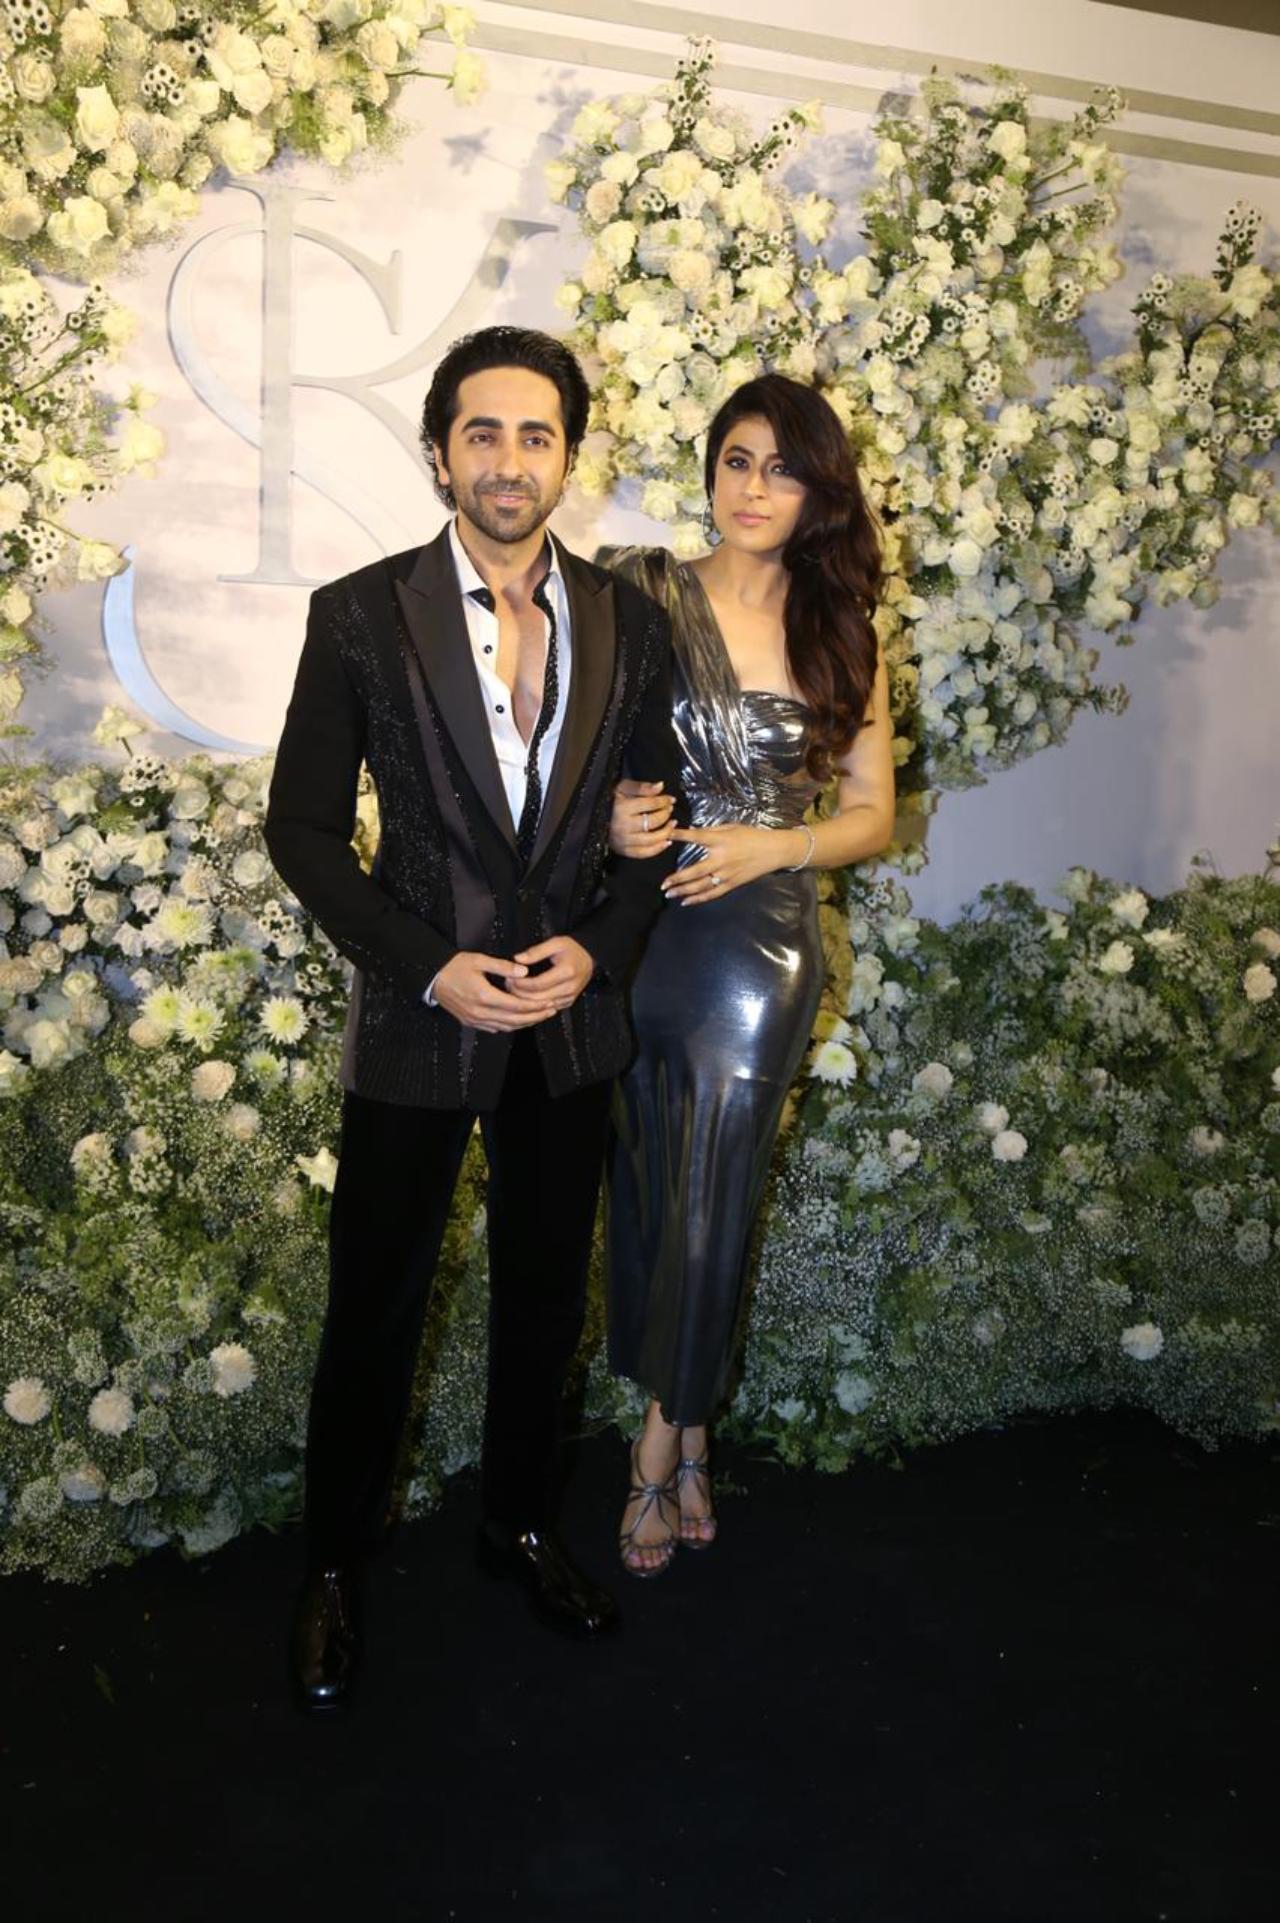 Ayushmann Khurrana came dressed in black. He was accompanied by his wife Tahira who looked gorgeous in a silver metallic dress